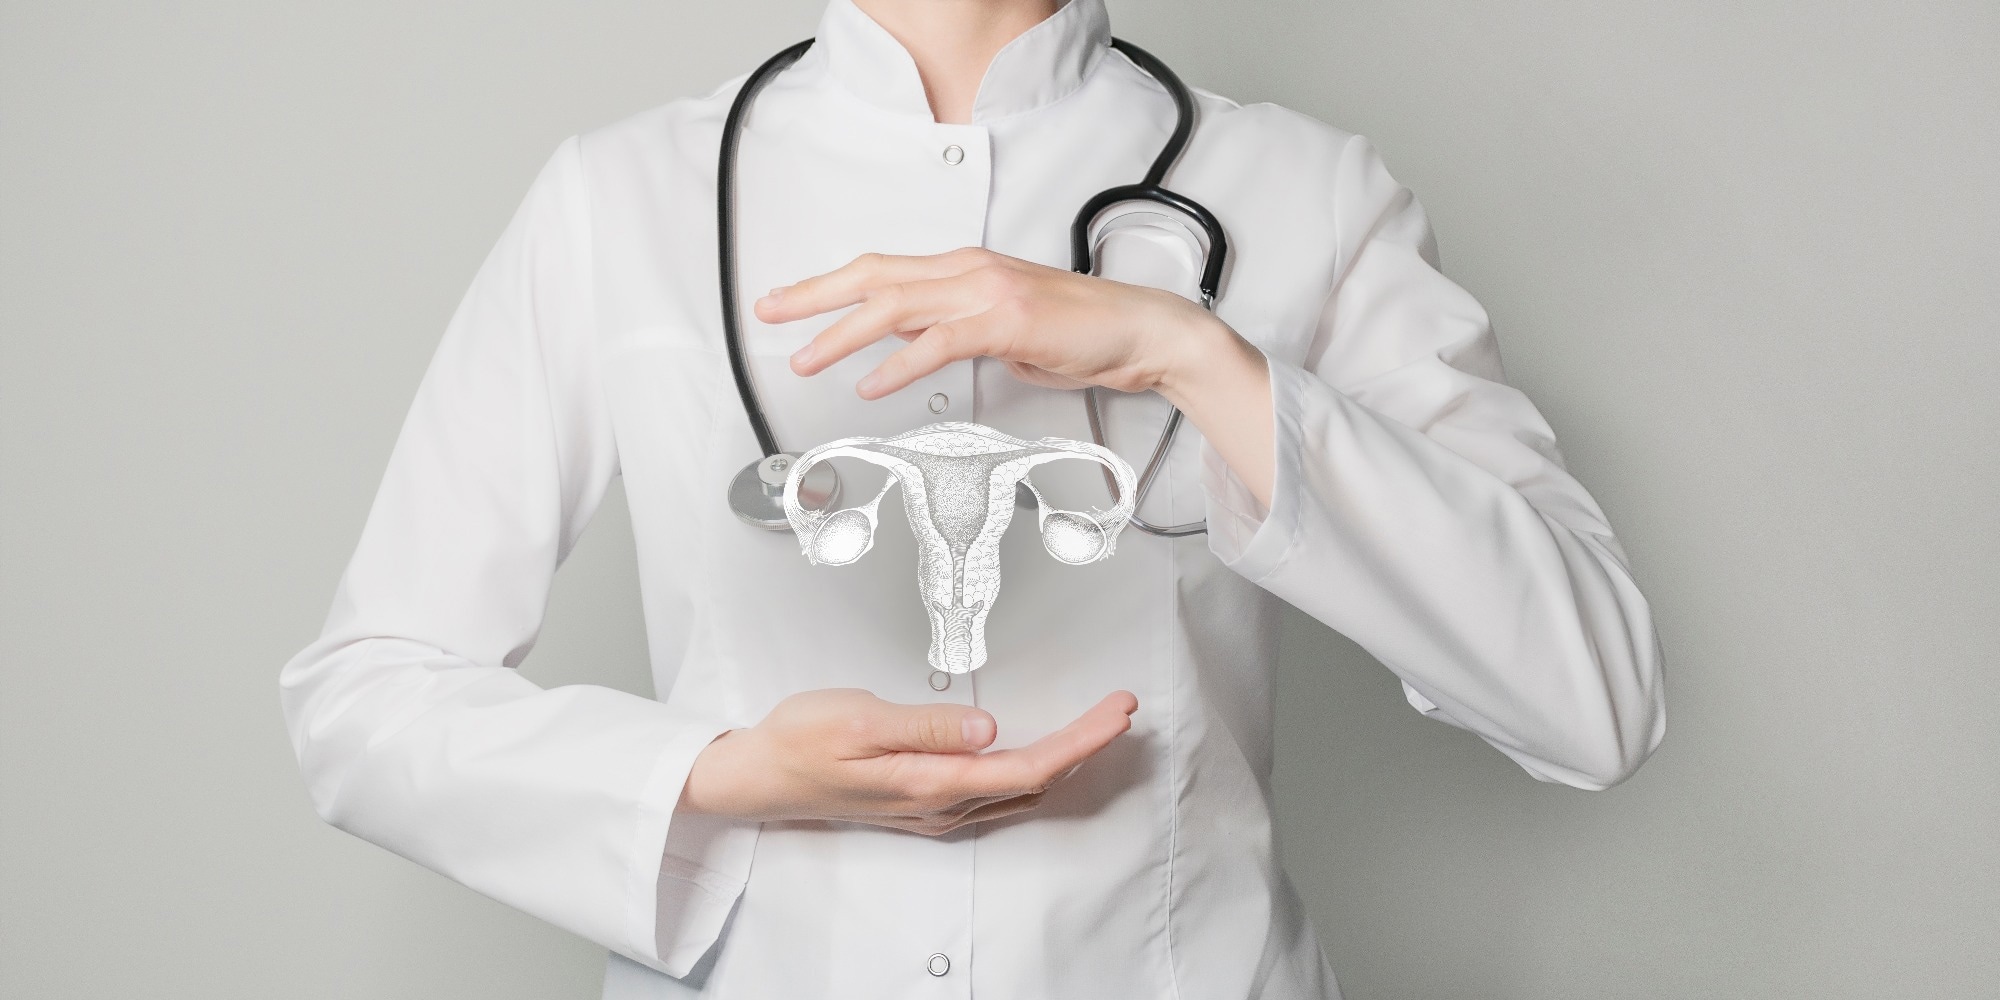 Study: Detection of endometrial cancer in cervico-vaginal fluid and blood plasma: leveraging proteomics and machine learning for biomarker discovery. Image Credit: mi_viri/Shutterstock.com